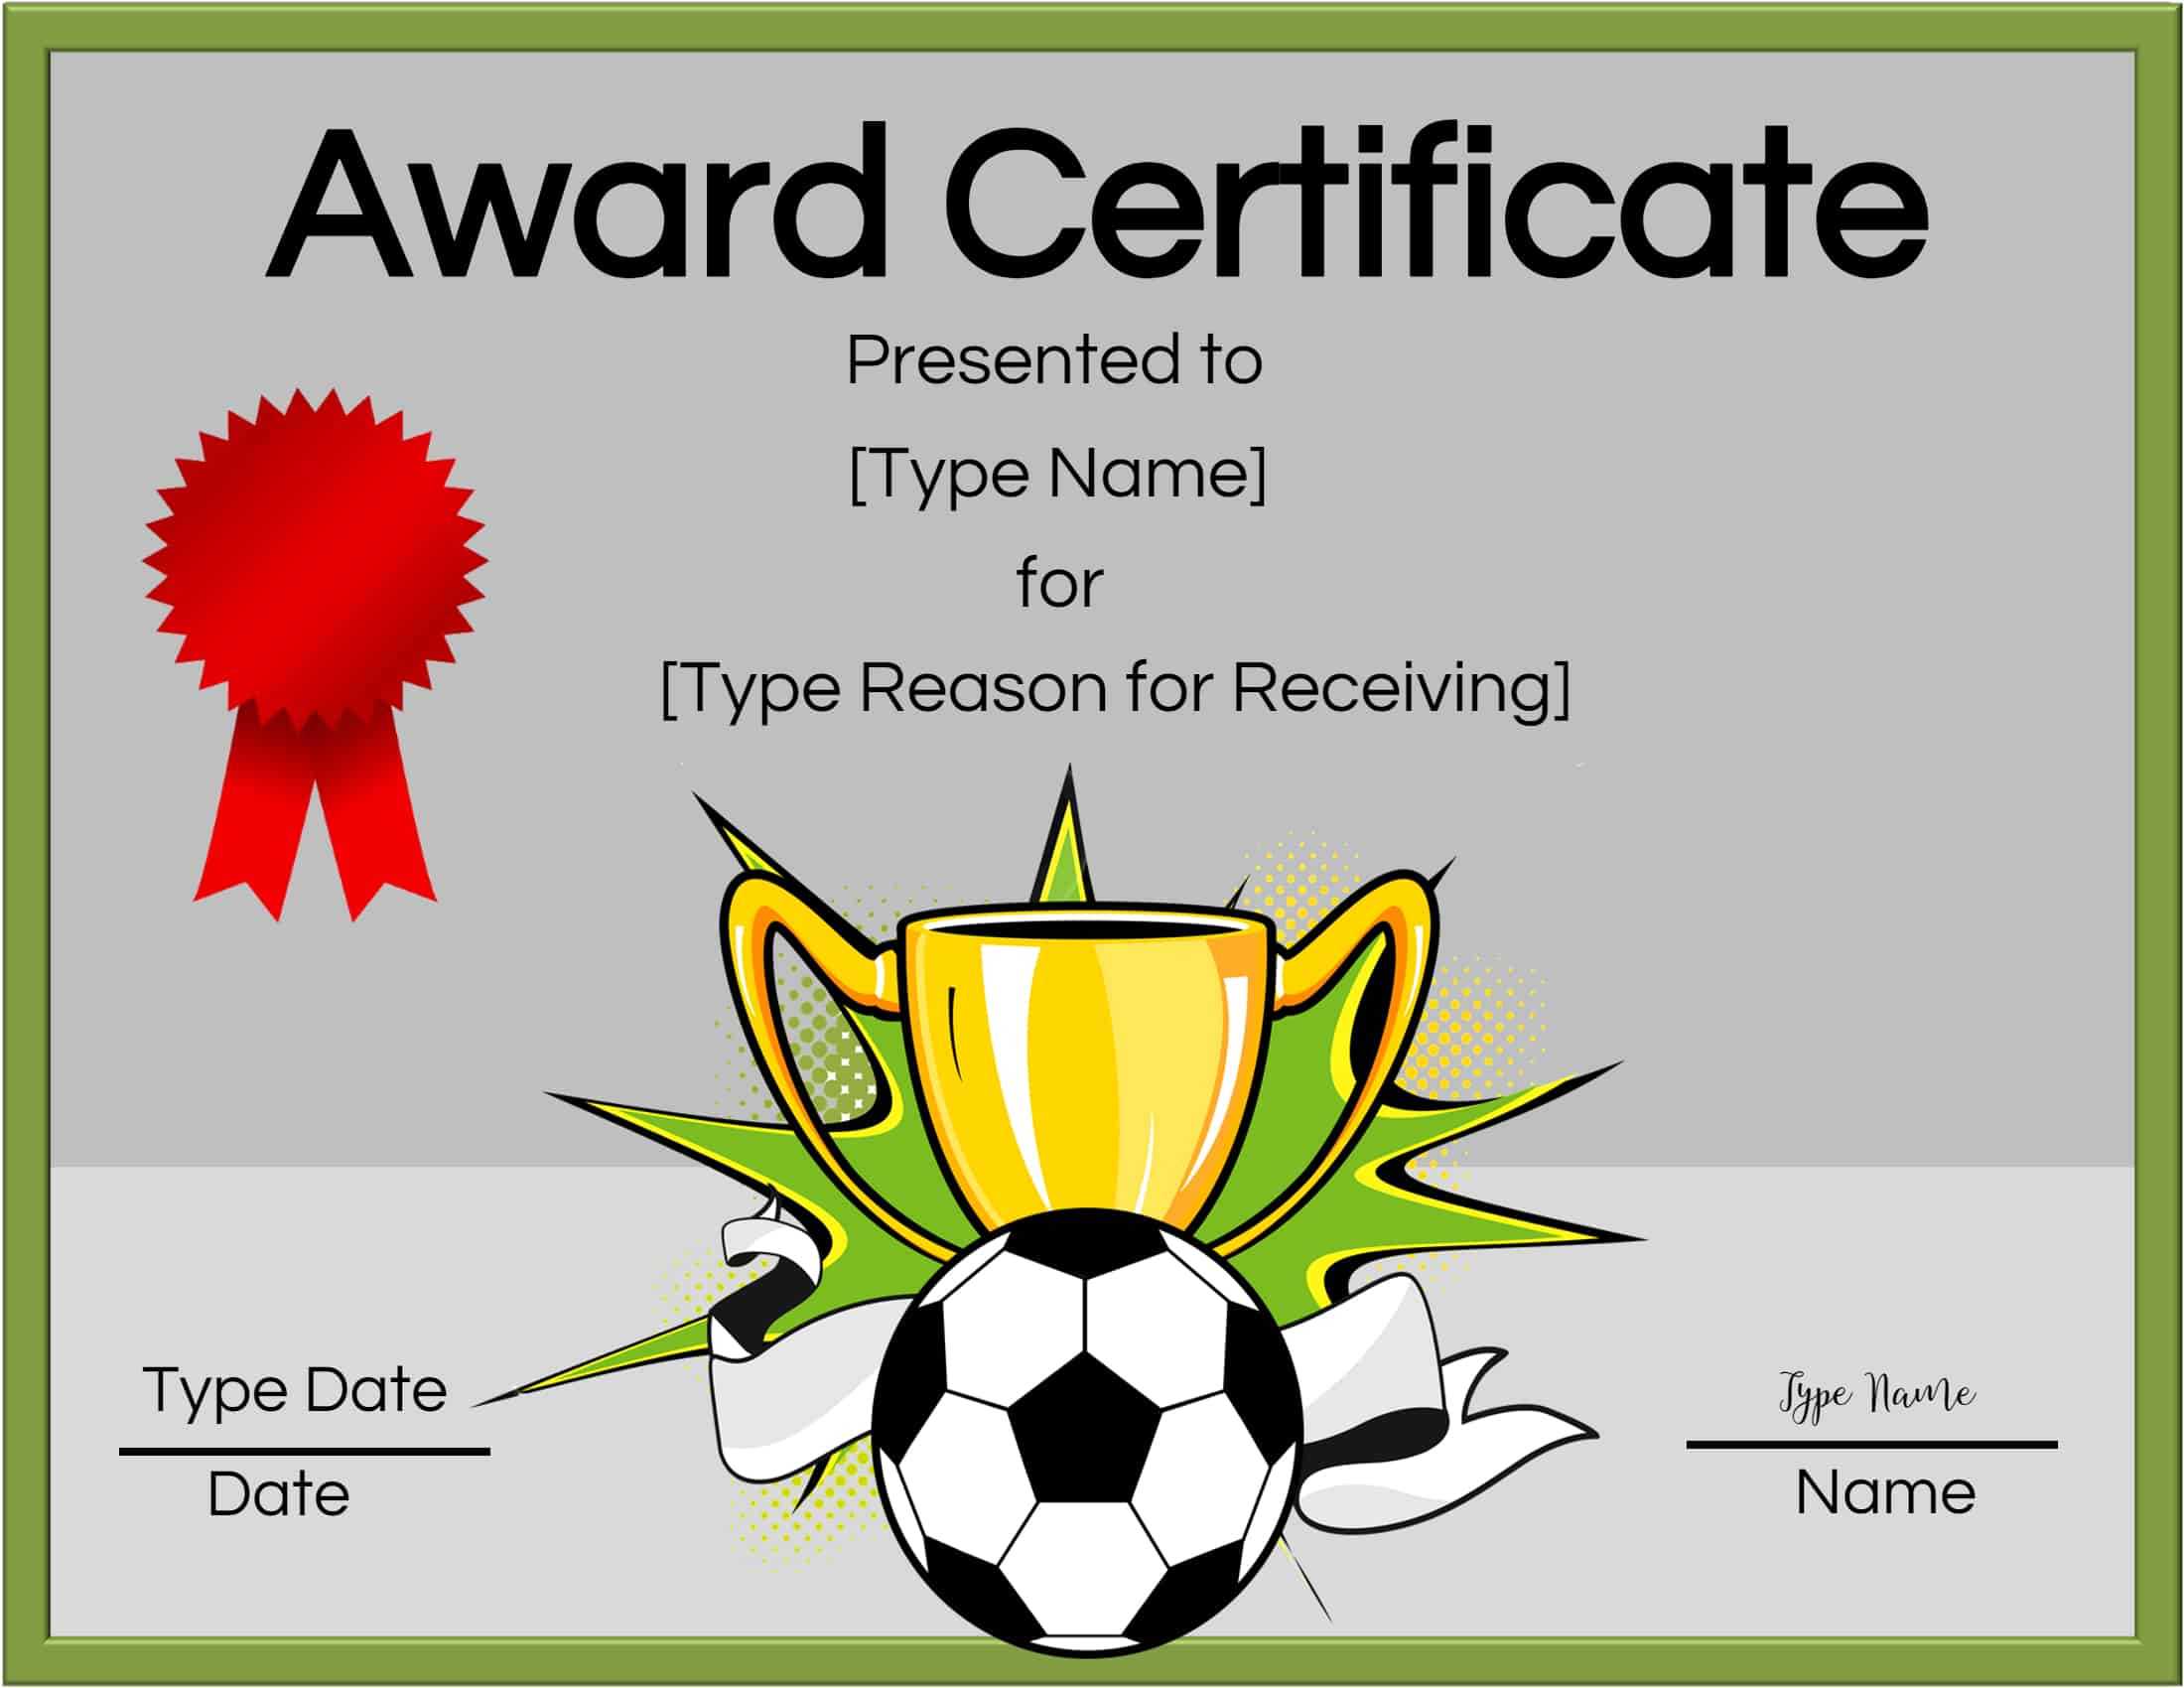 Free Soccer Certificate Maker | Edit Online And Print At Home Intended For Soccer Certificate Template